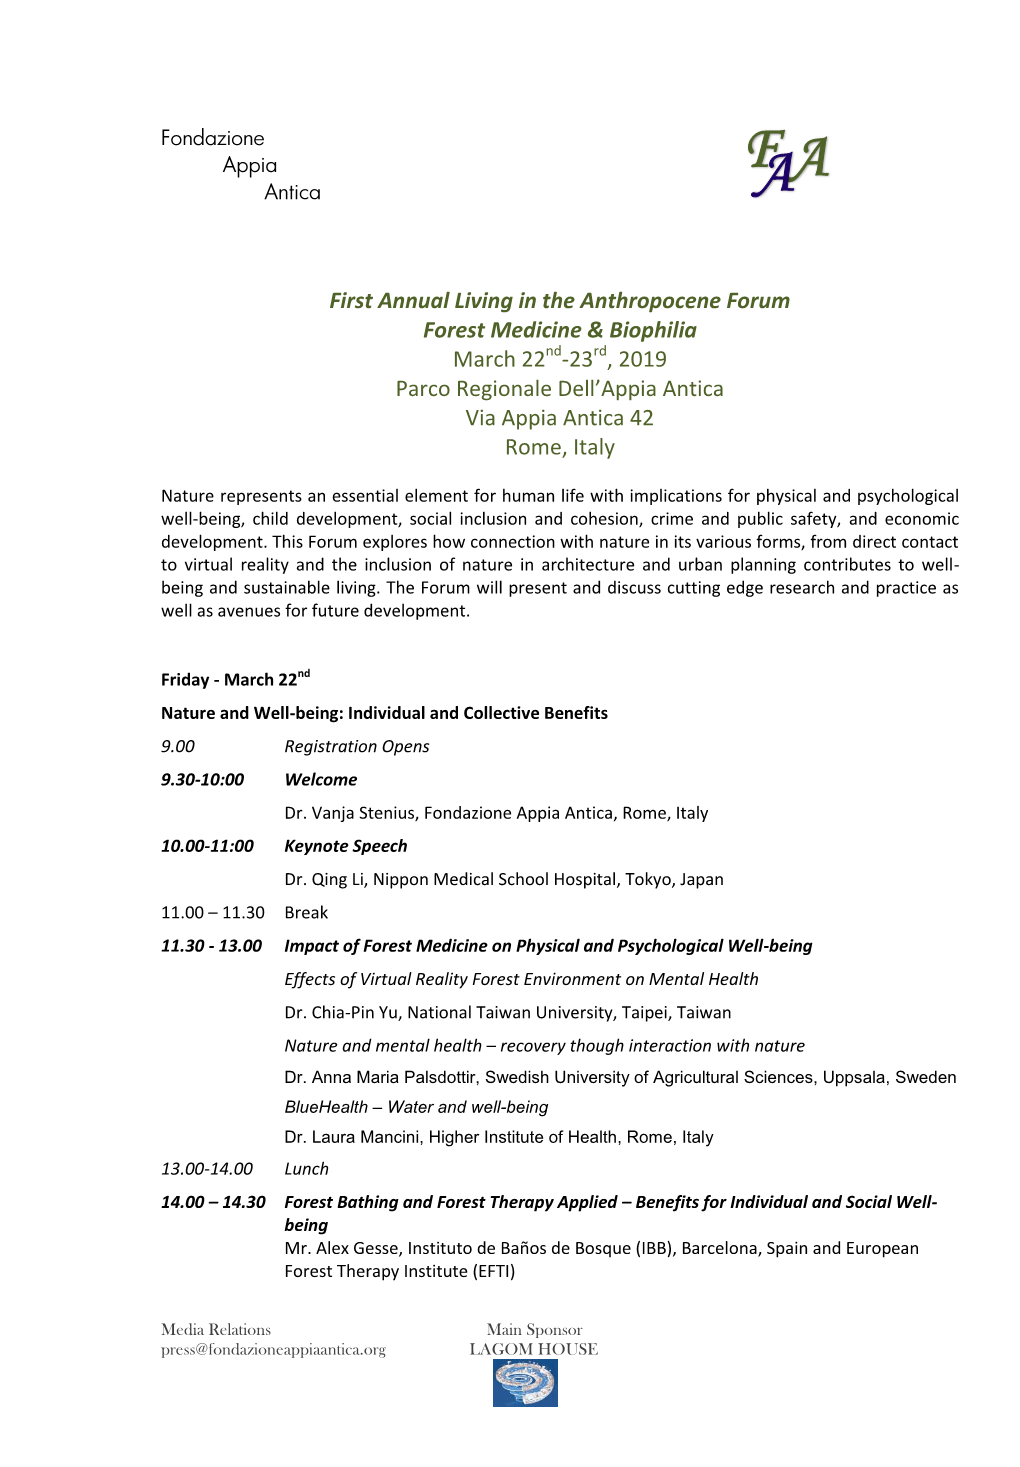 First Annual Living in the Anthropocene Forum, Forest